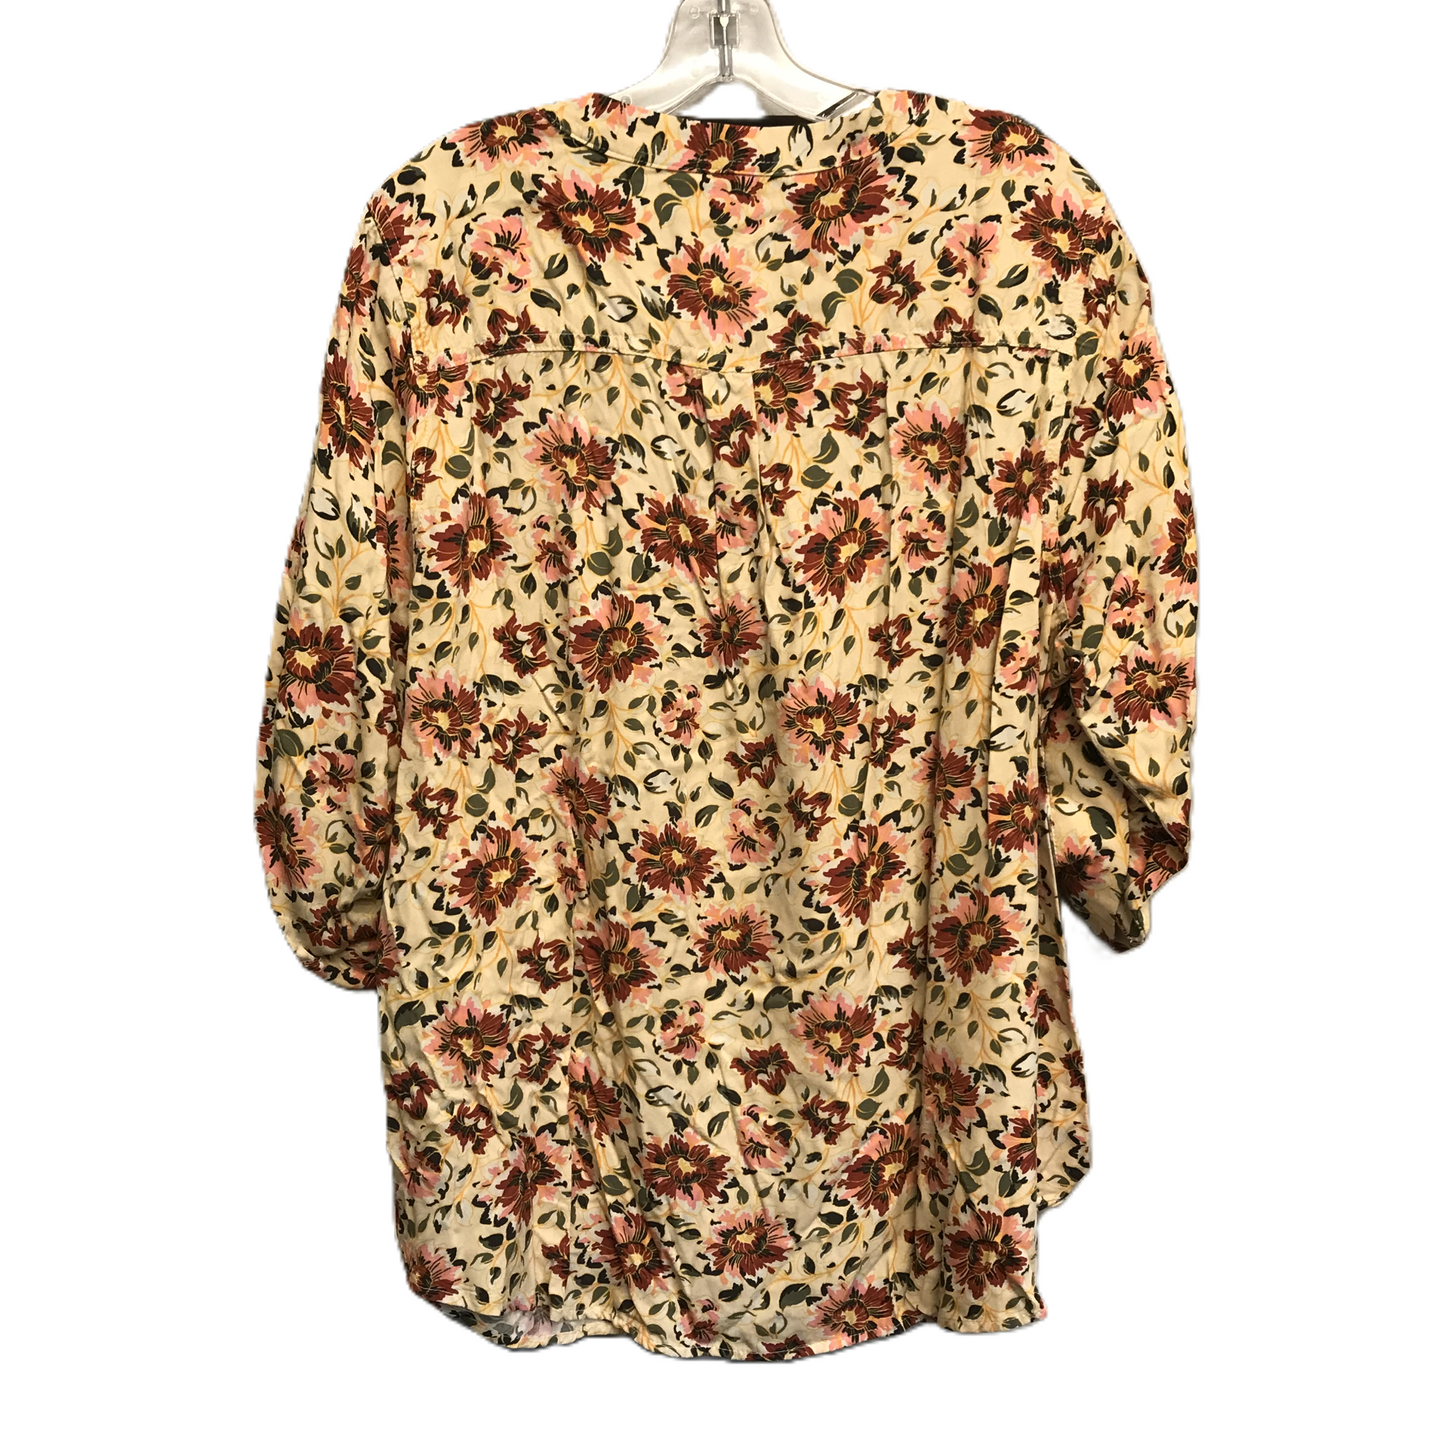 Floral Print Top Long Sleeve By Torrid, Size: 2x